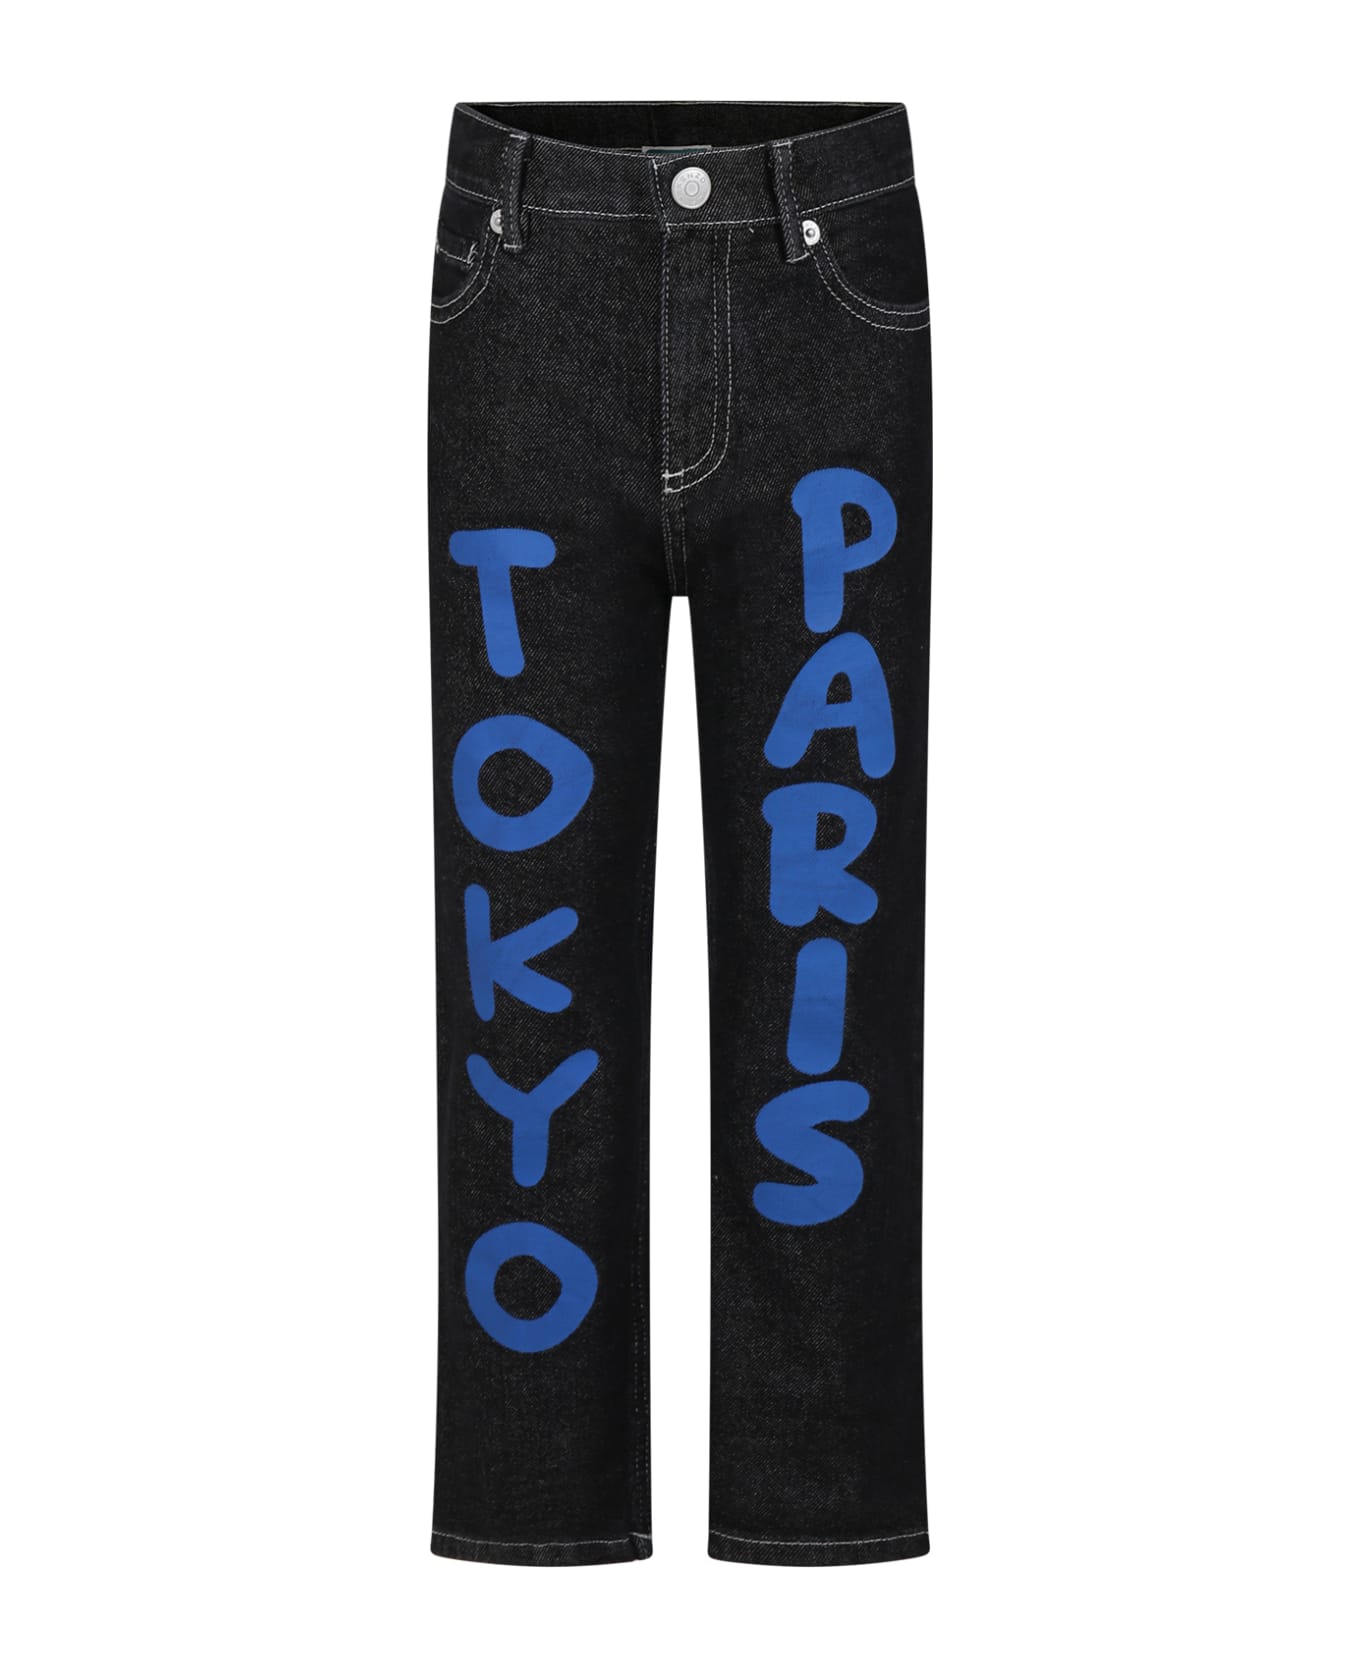 Kenzo Kids Black Jeans For Child With Logo Print - Black ボトムス